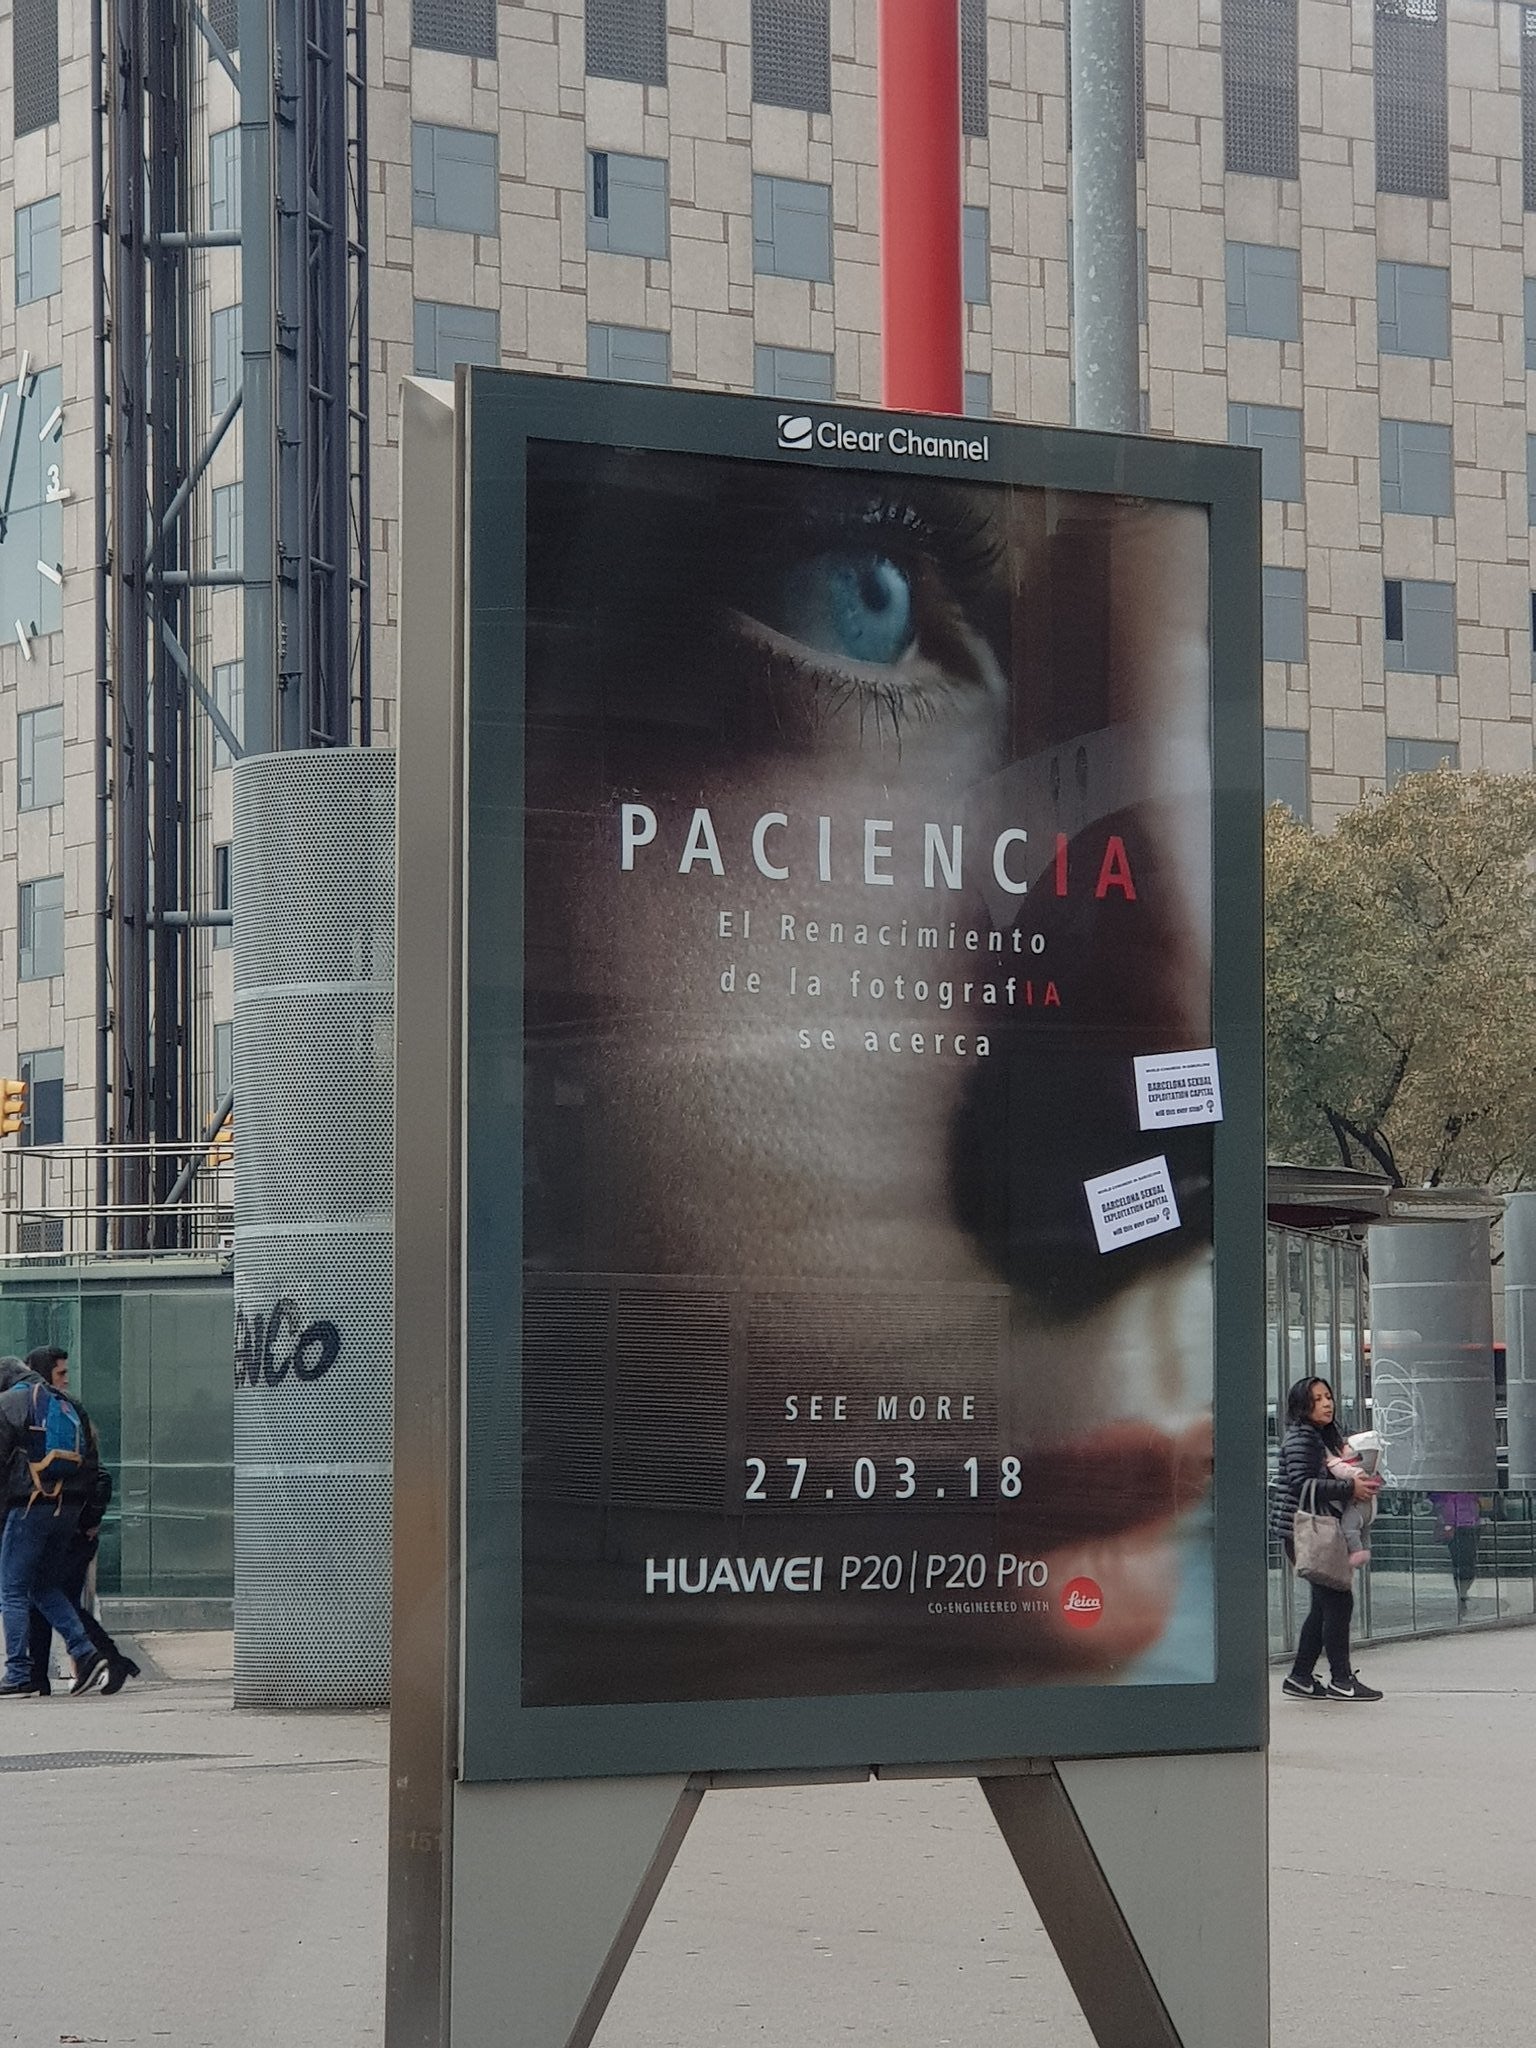 Huawei billboard confirms P20 Pro name for its next flagship